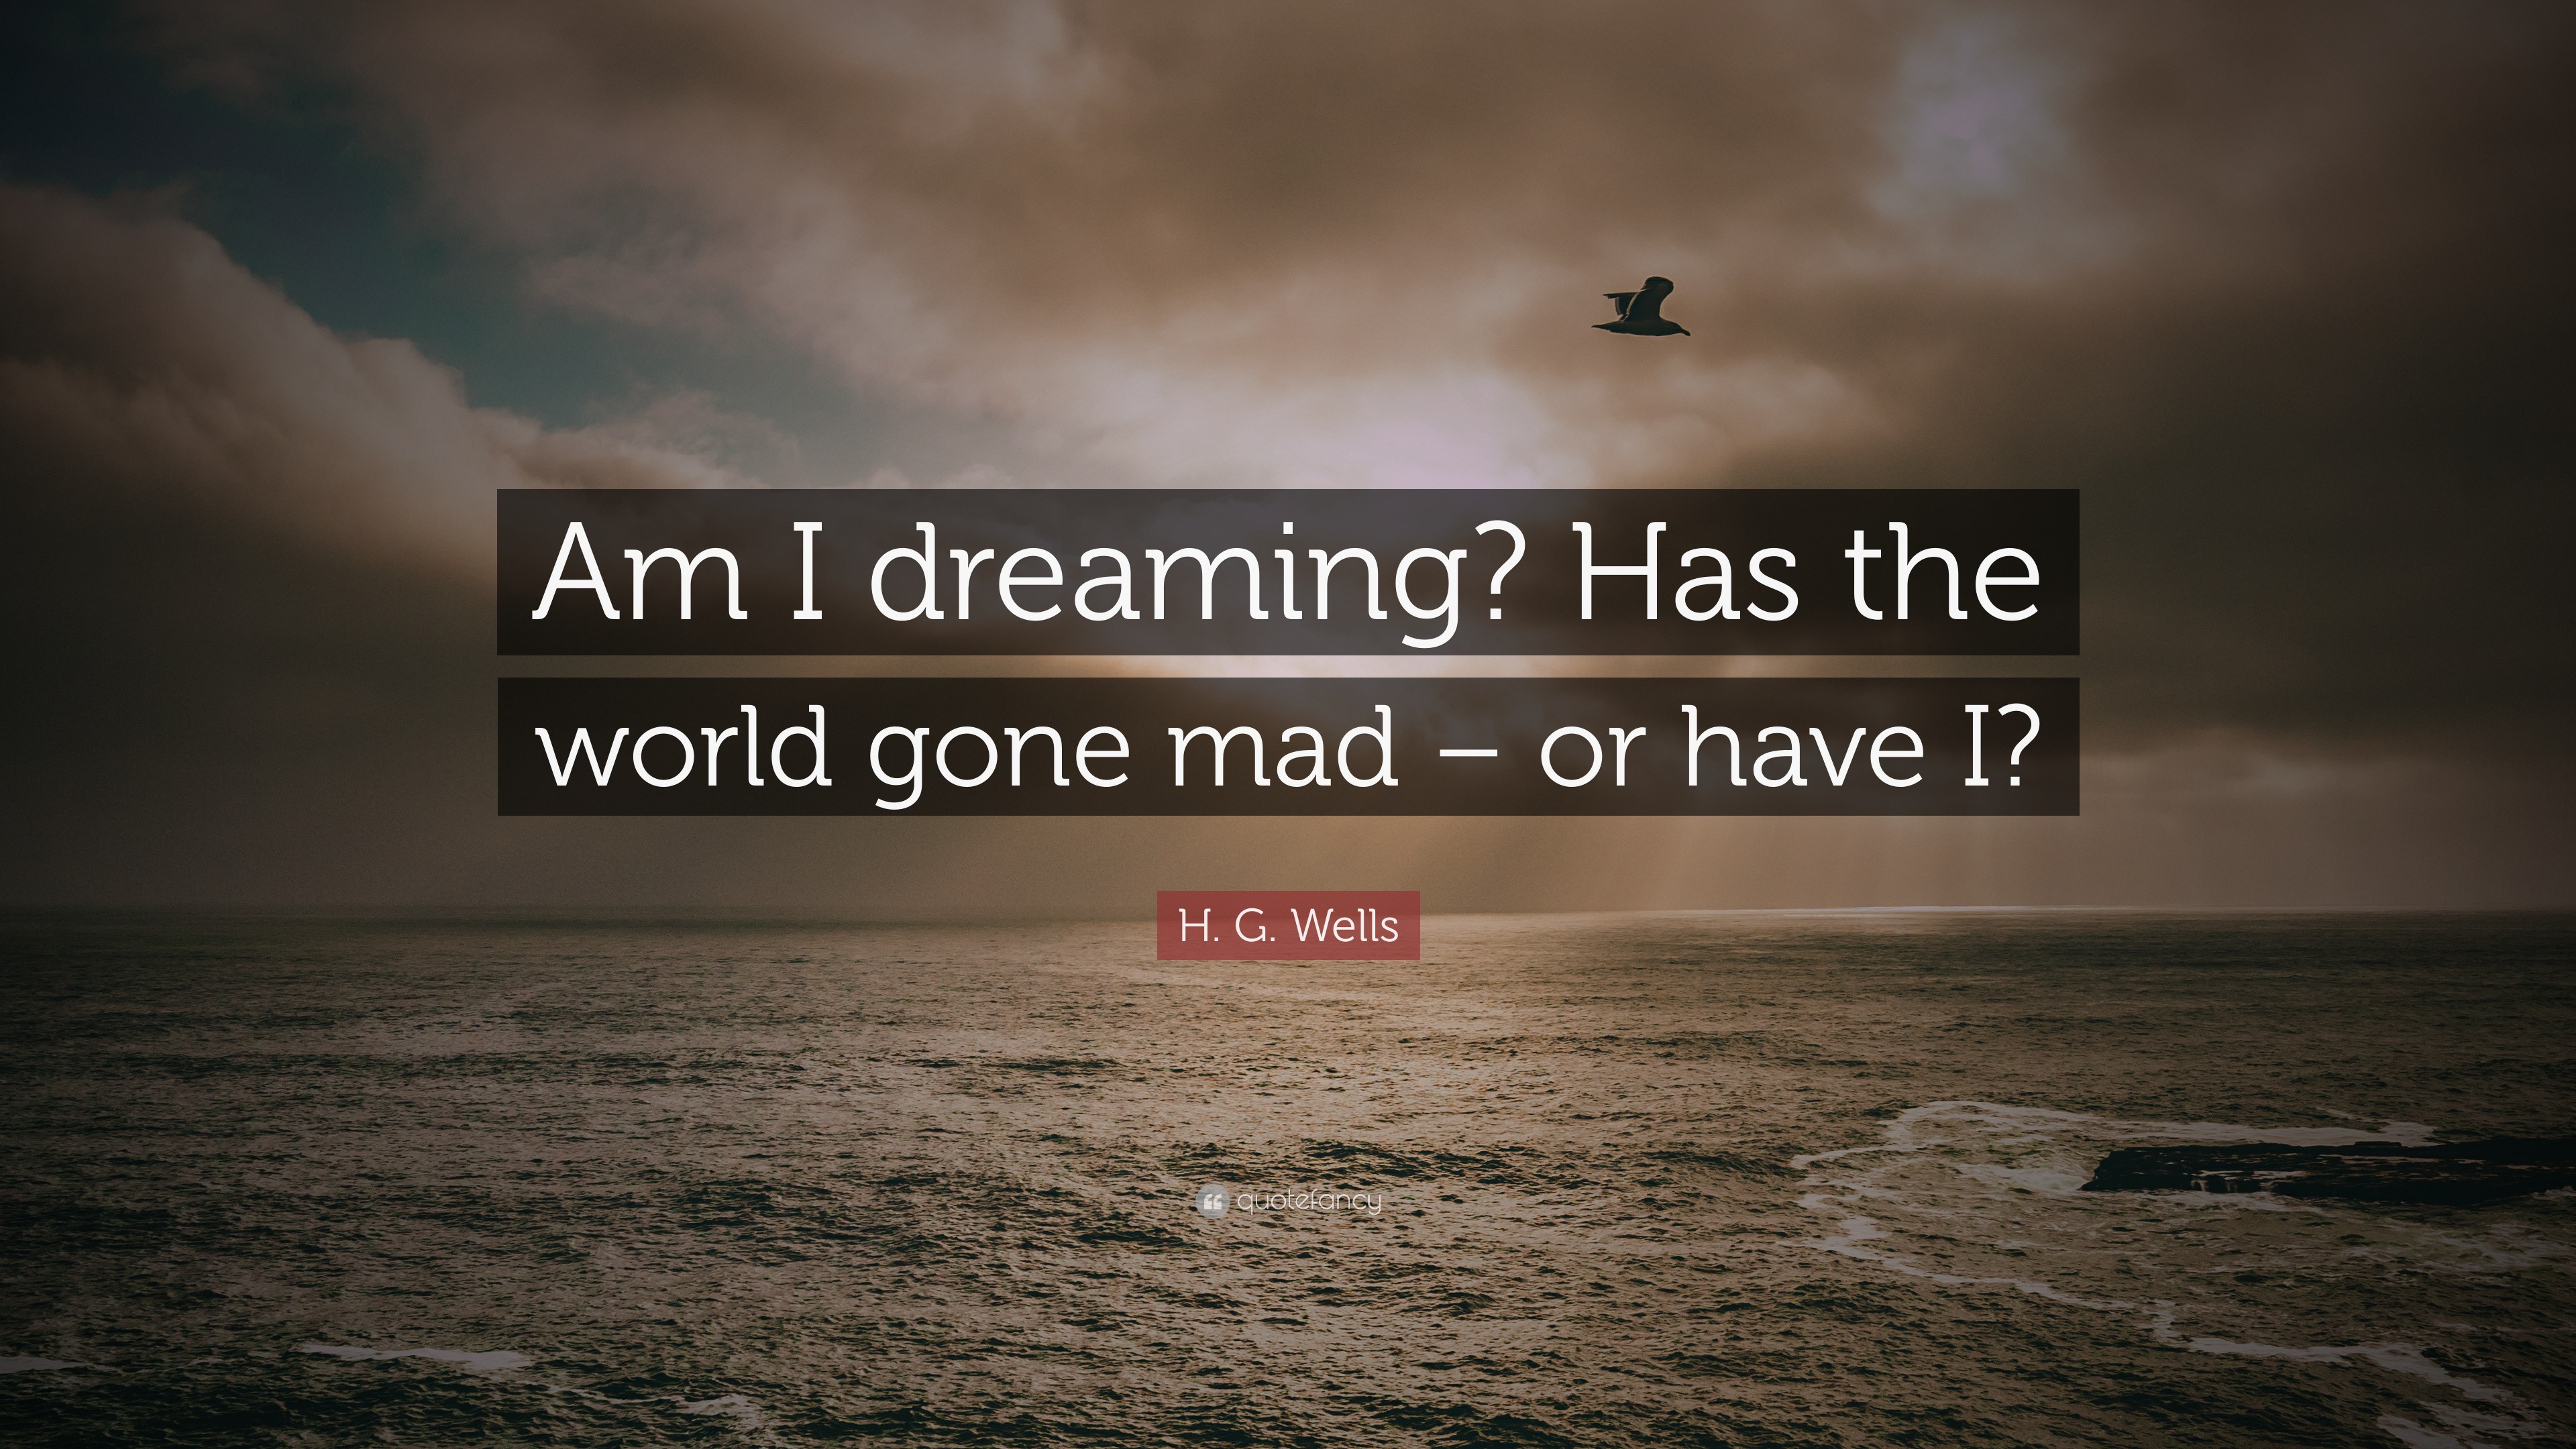 H. G. Wells Quote: “Am I dreaming? Has the world gone mad – or have I?”